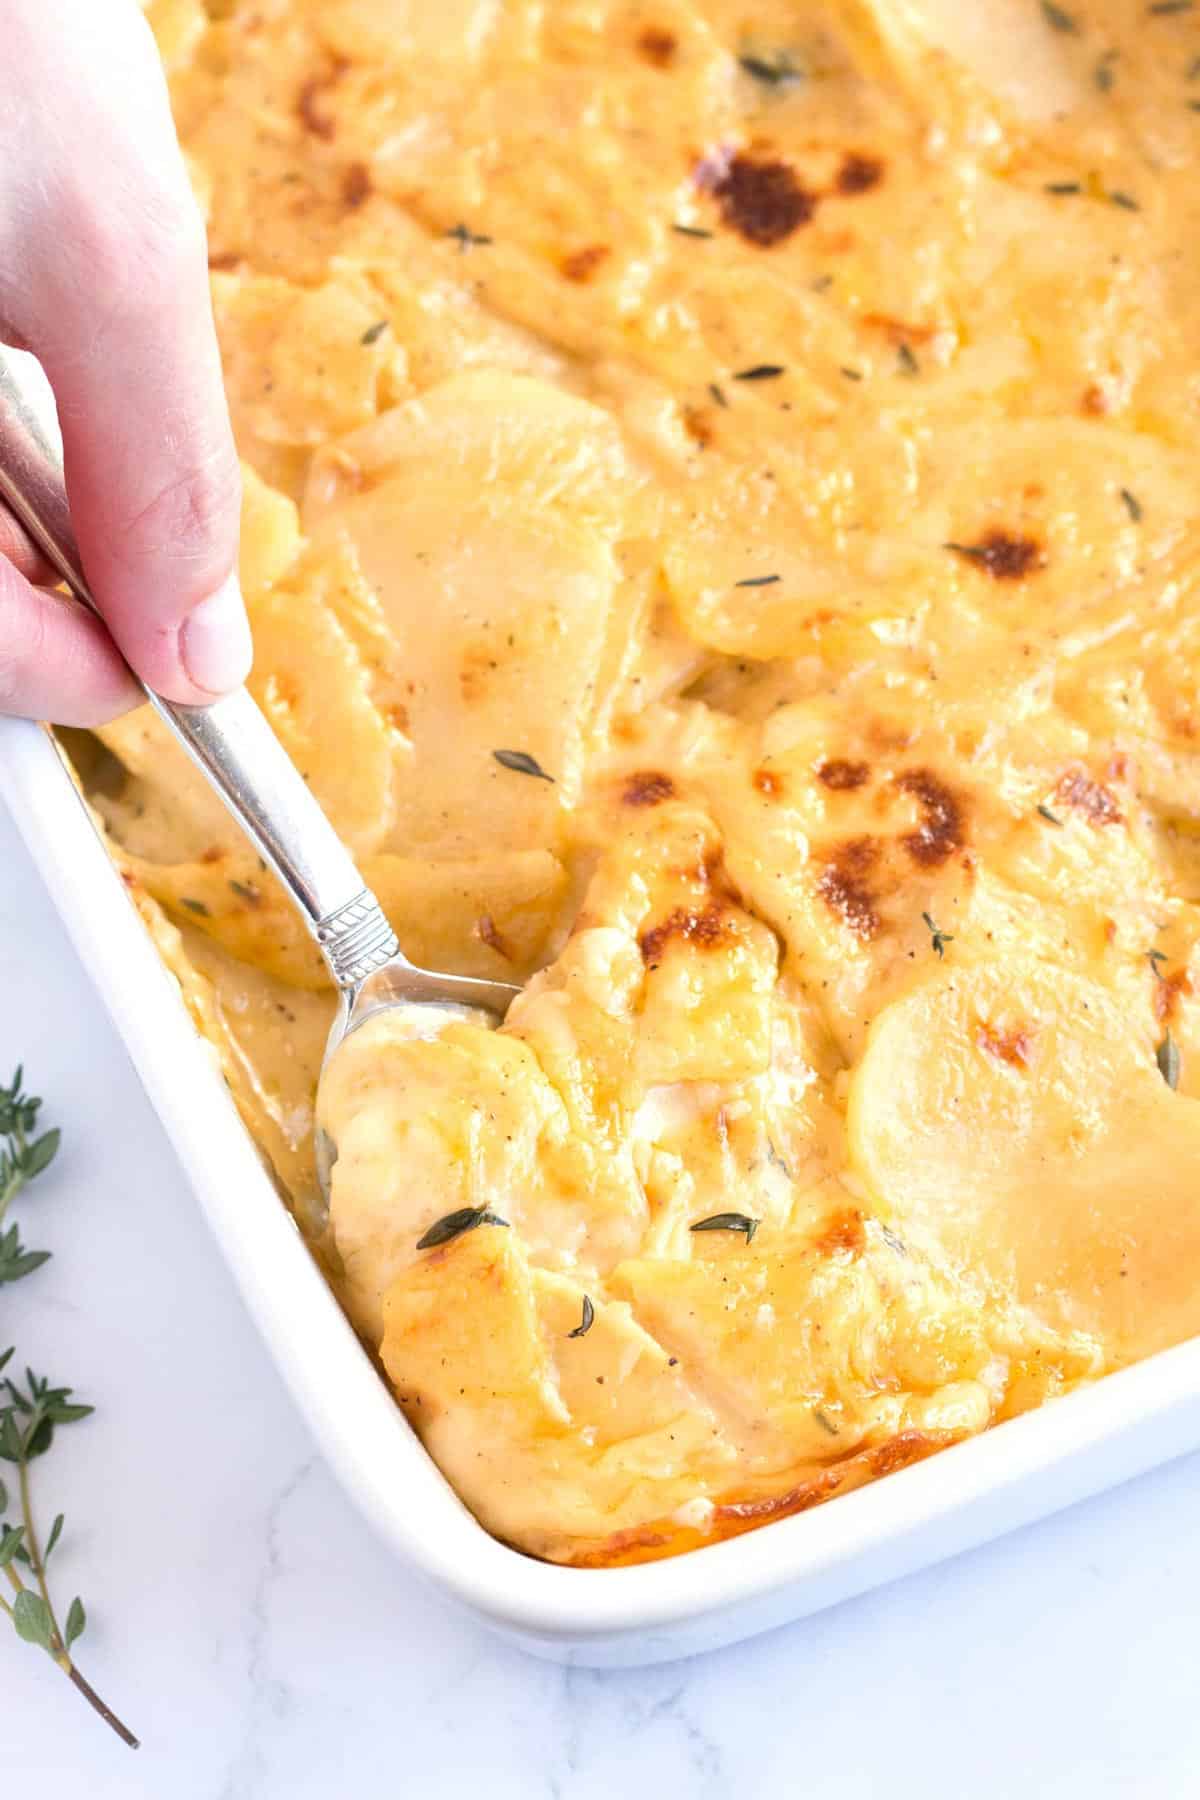 Spoon scooping scalloped potatoes laden with cheese.